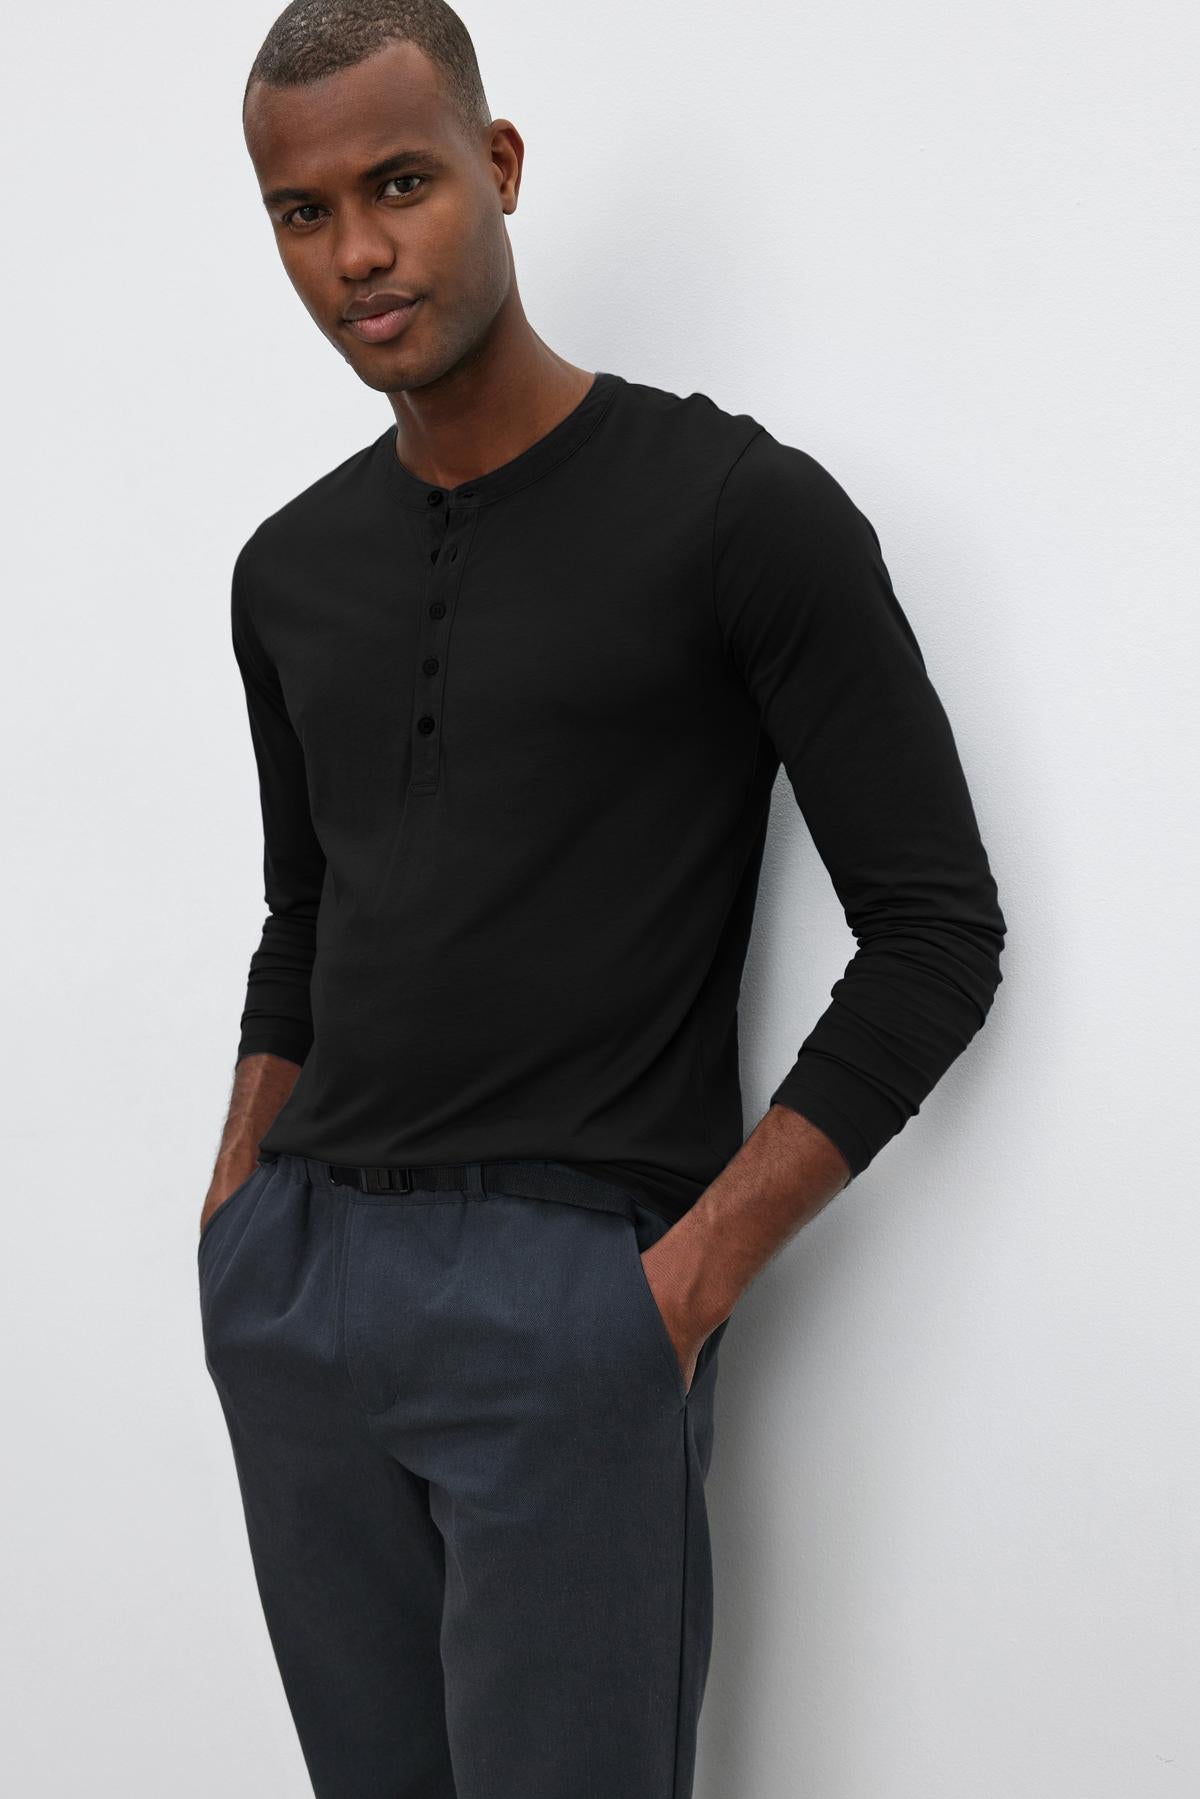 A man wearing a Velvet by Graham & Spencer ALVARO COTTON JERSEY HENLEY leans against a wall.-36273890394305